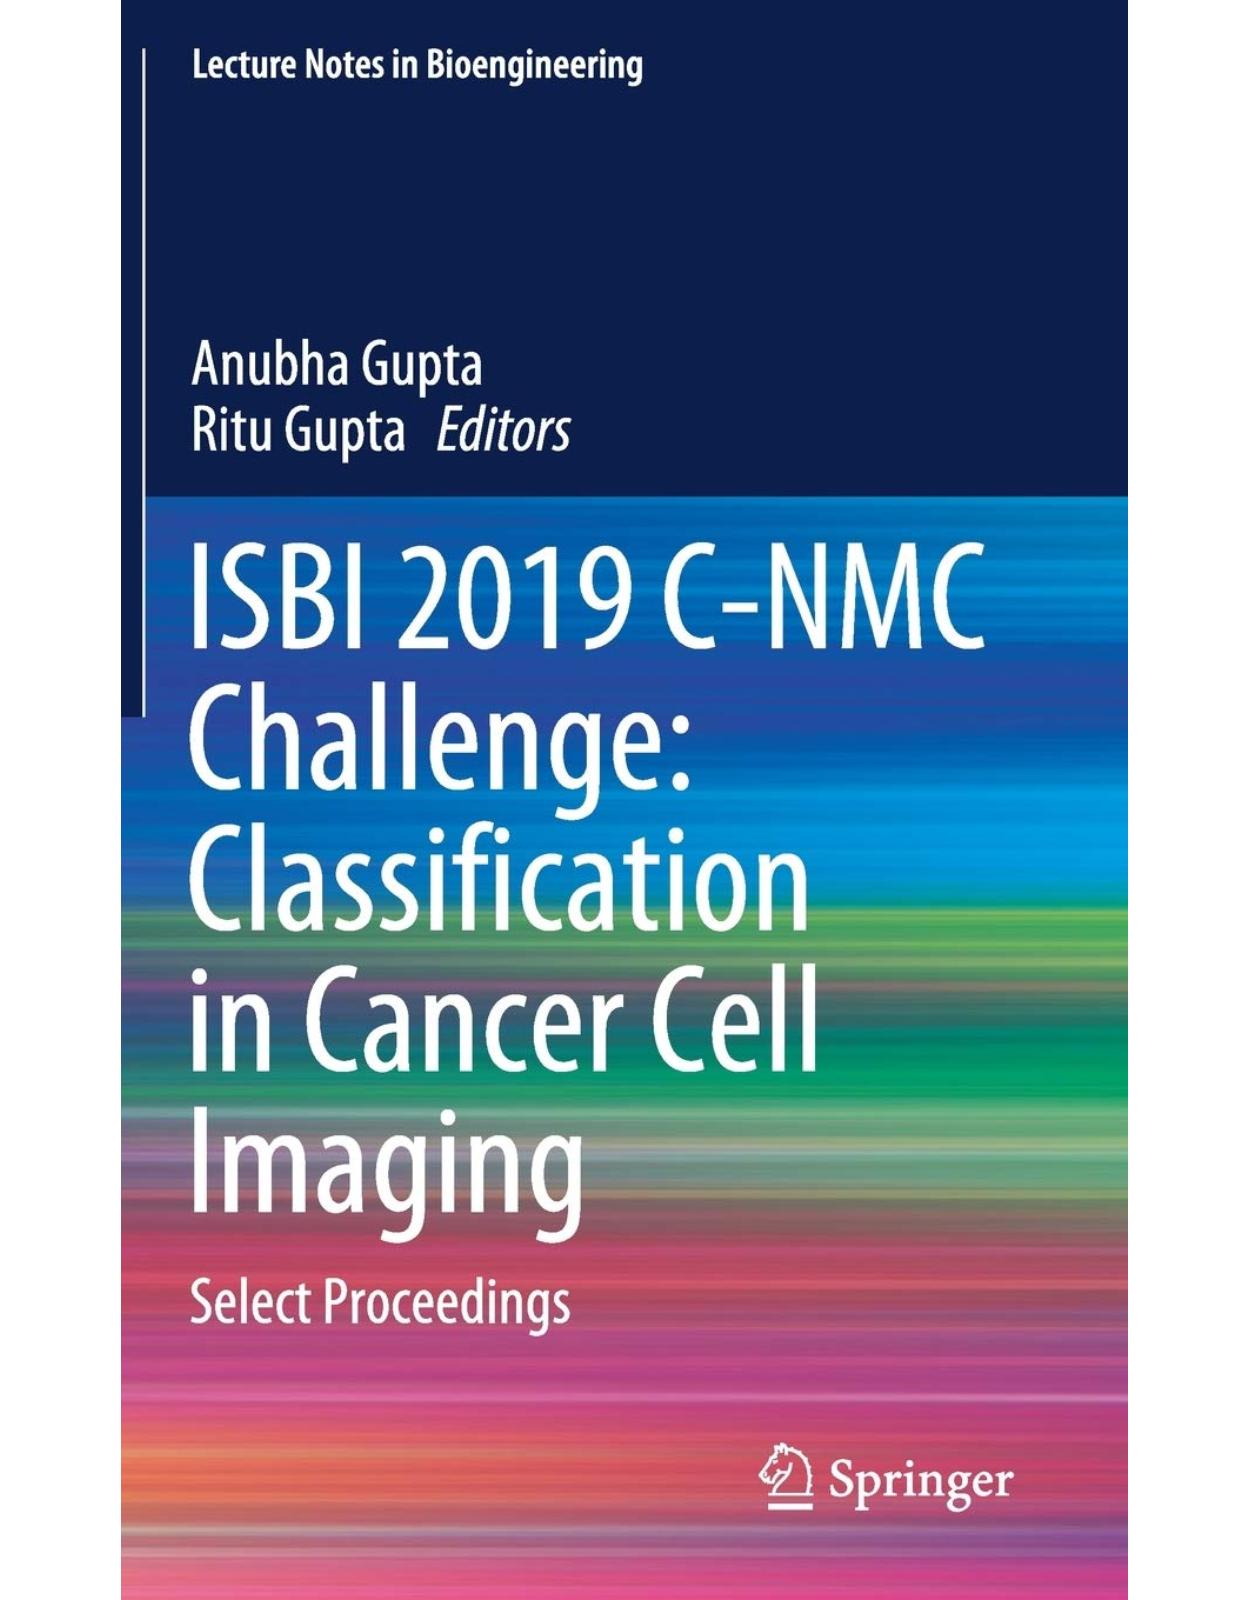 ISBI 2019 C-NMC Challenge: Classification in Cancer Cell Imaging: Select Proceedings